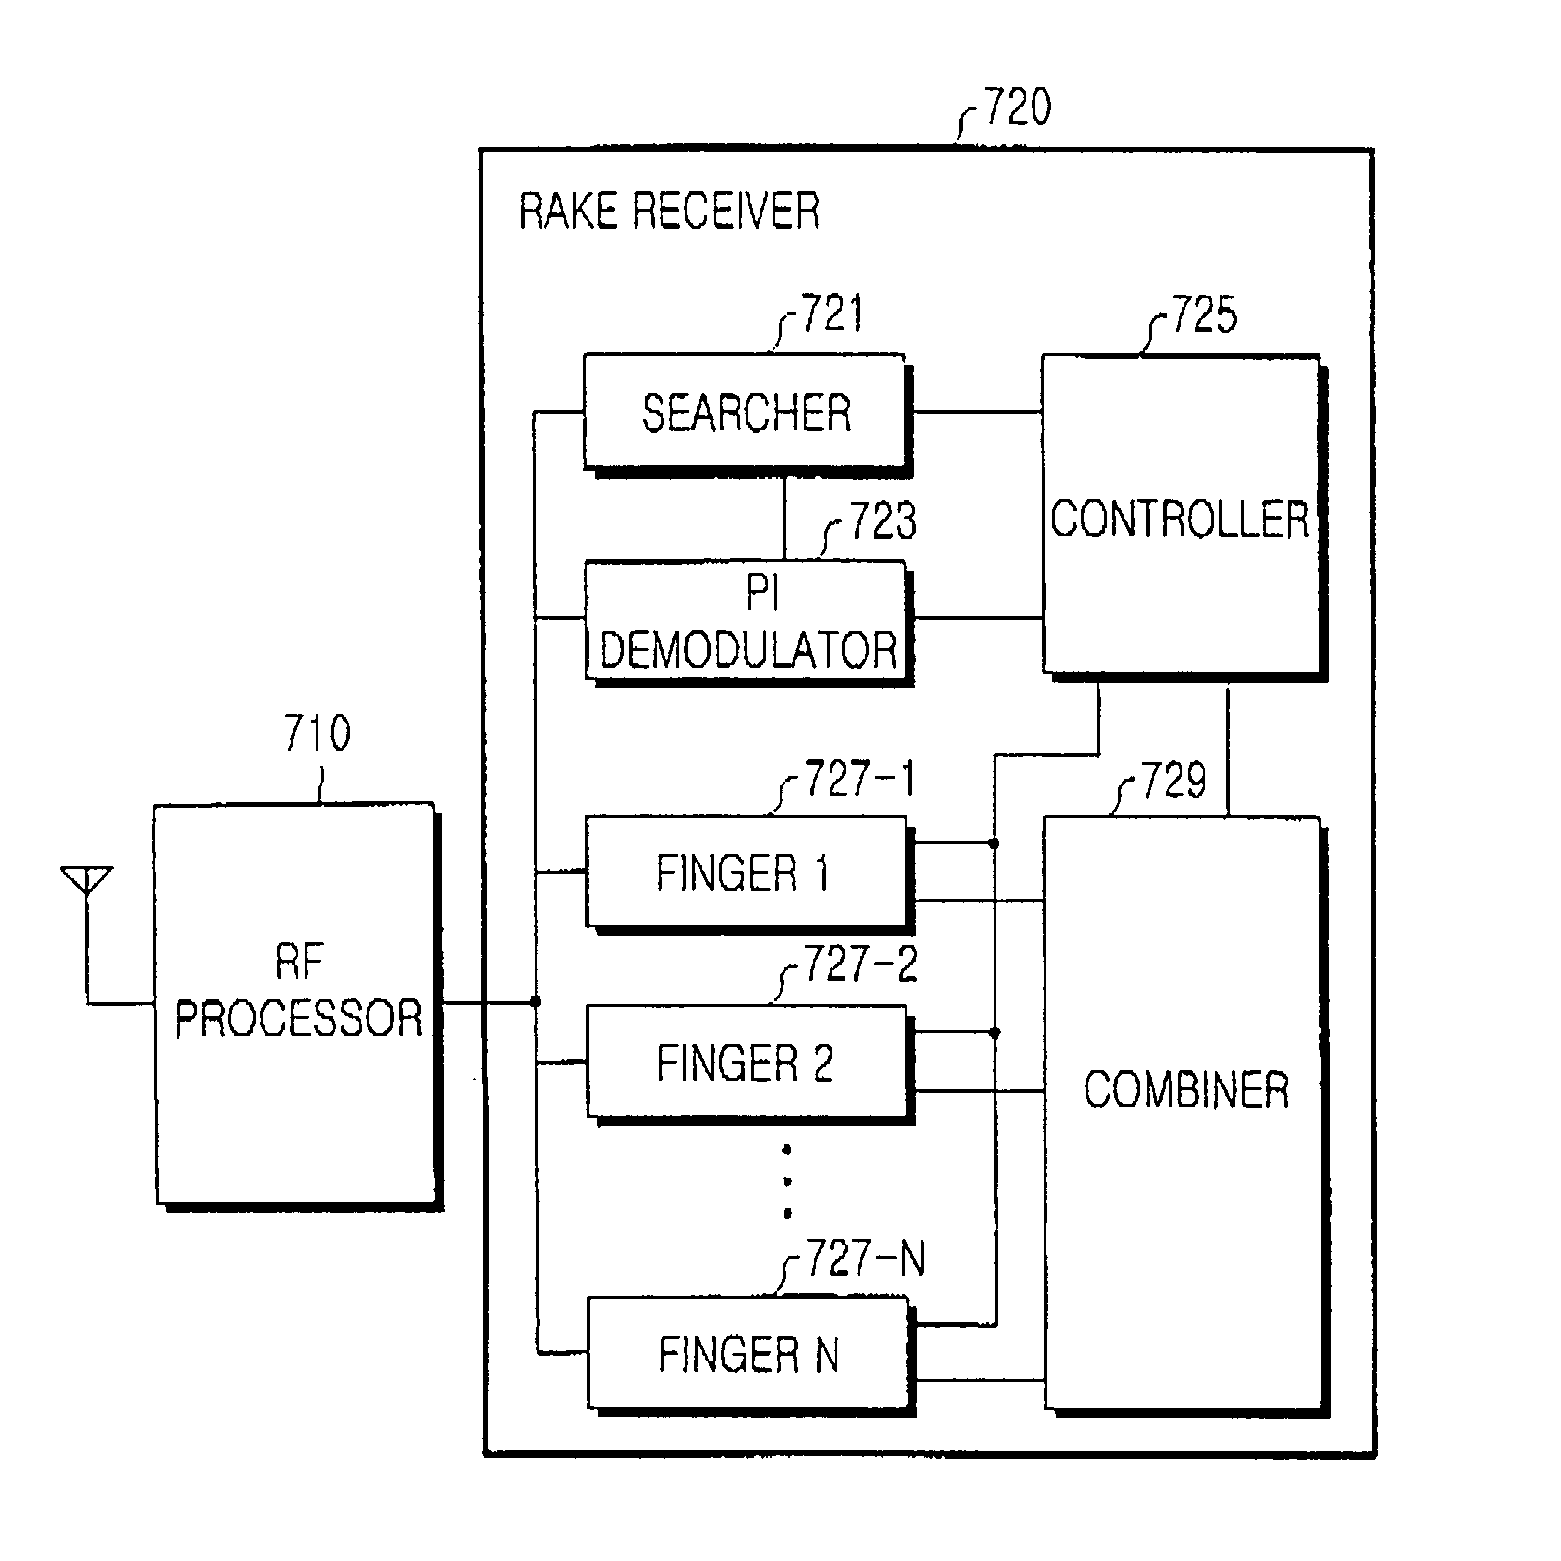 Rake reception apparatus and method in a mobile terminal